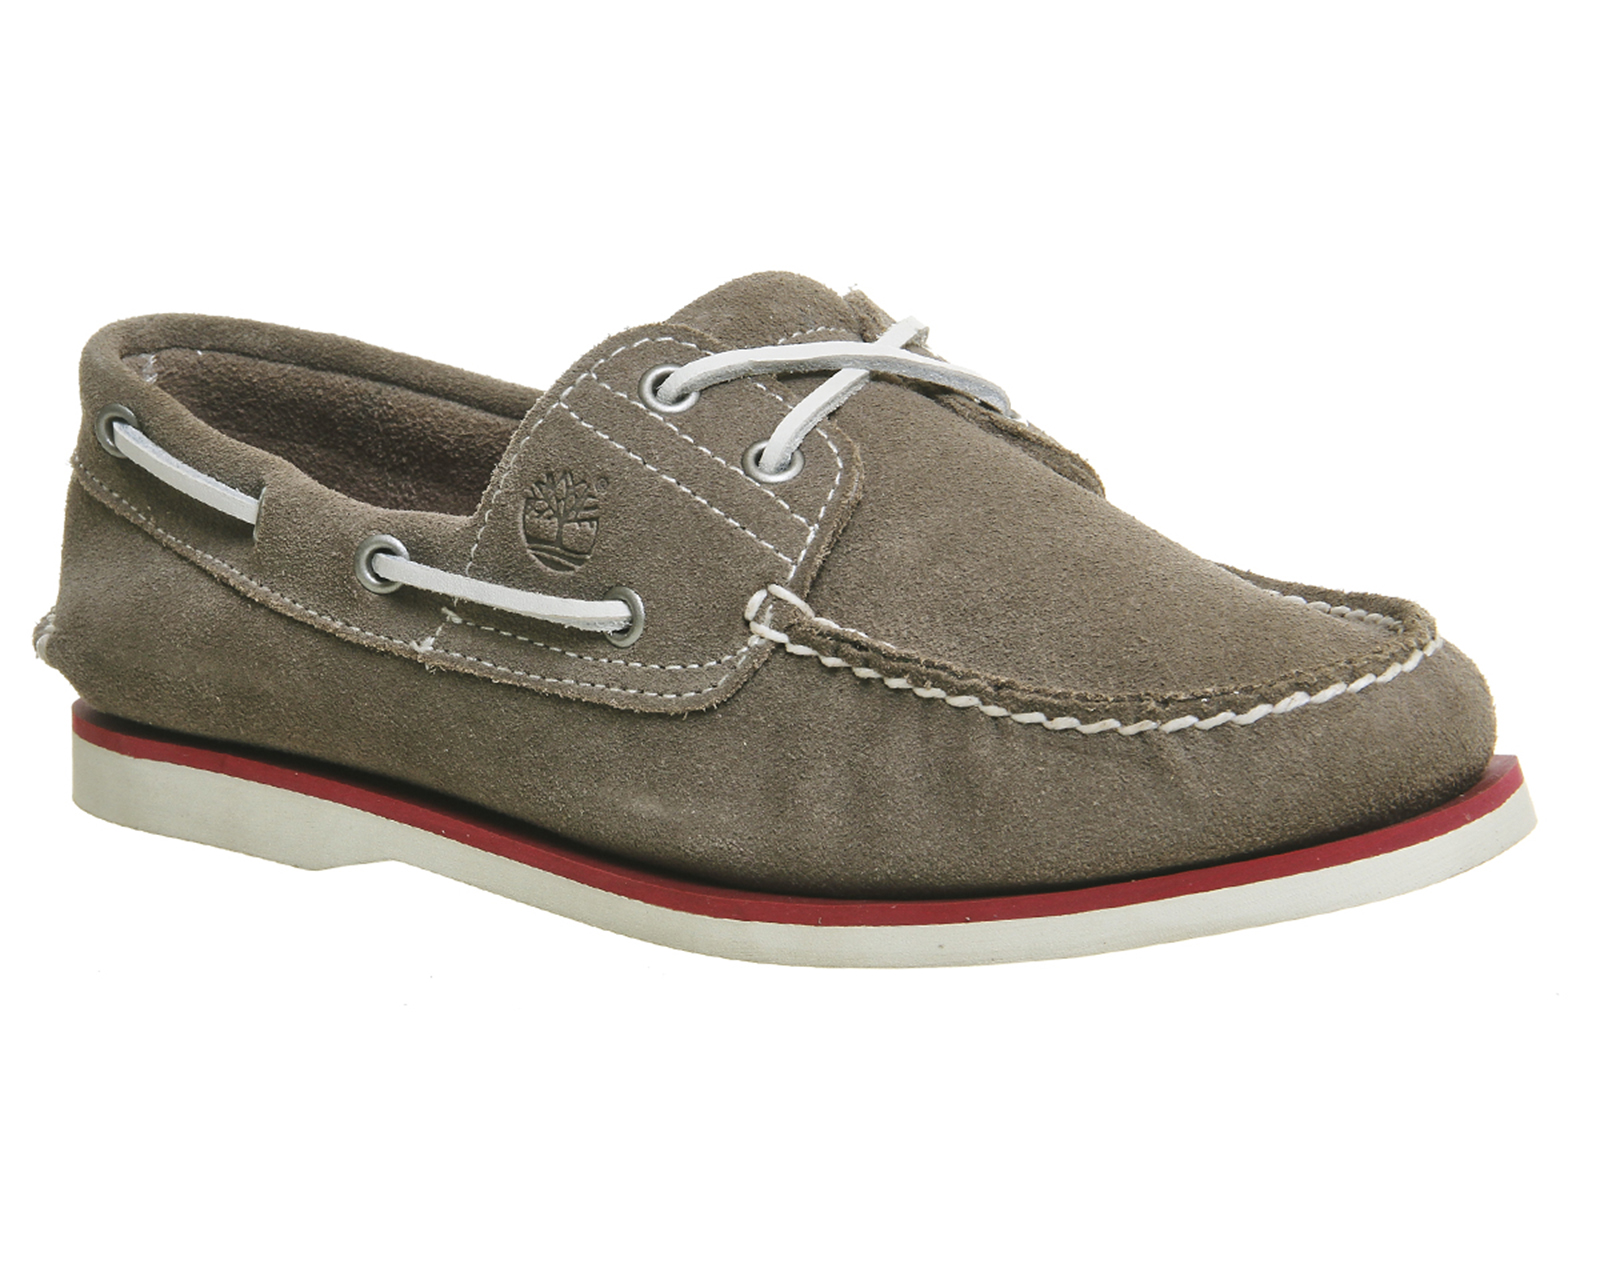 mens timberland boat shoes sale uk